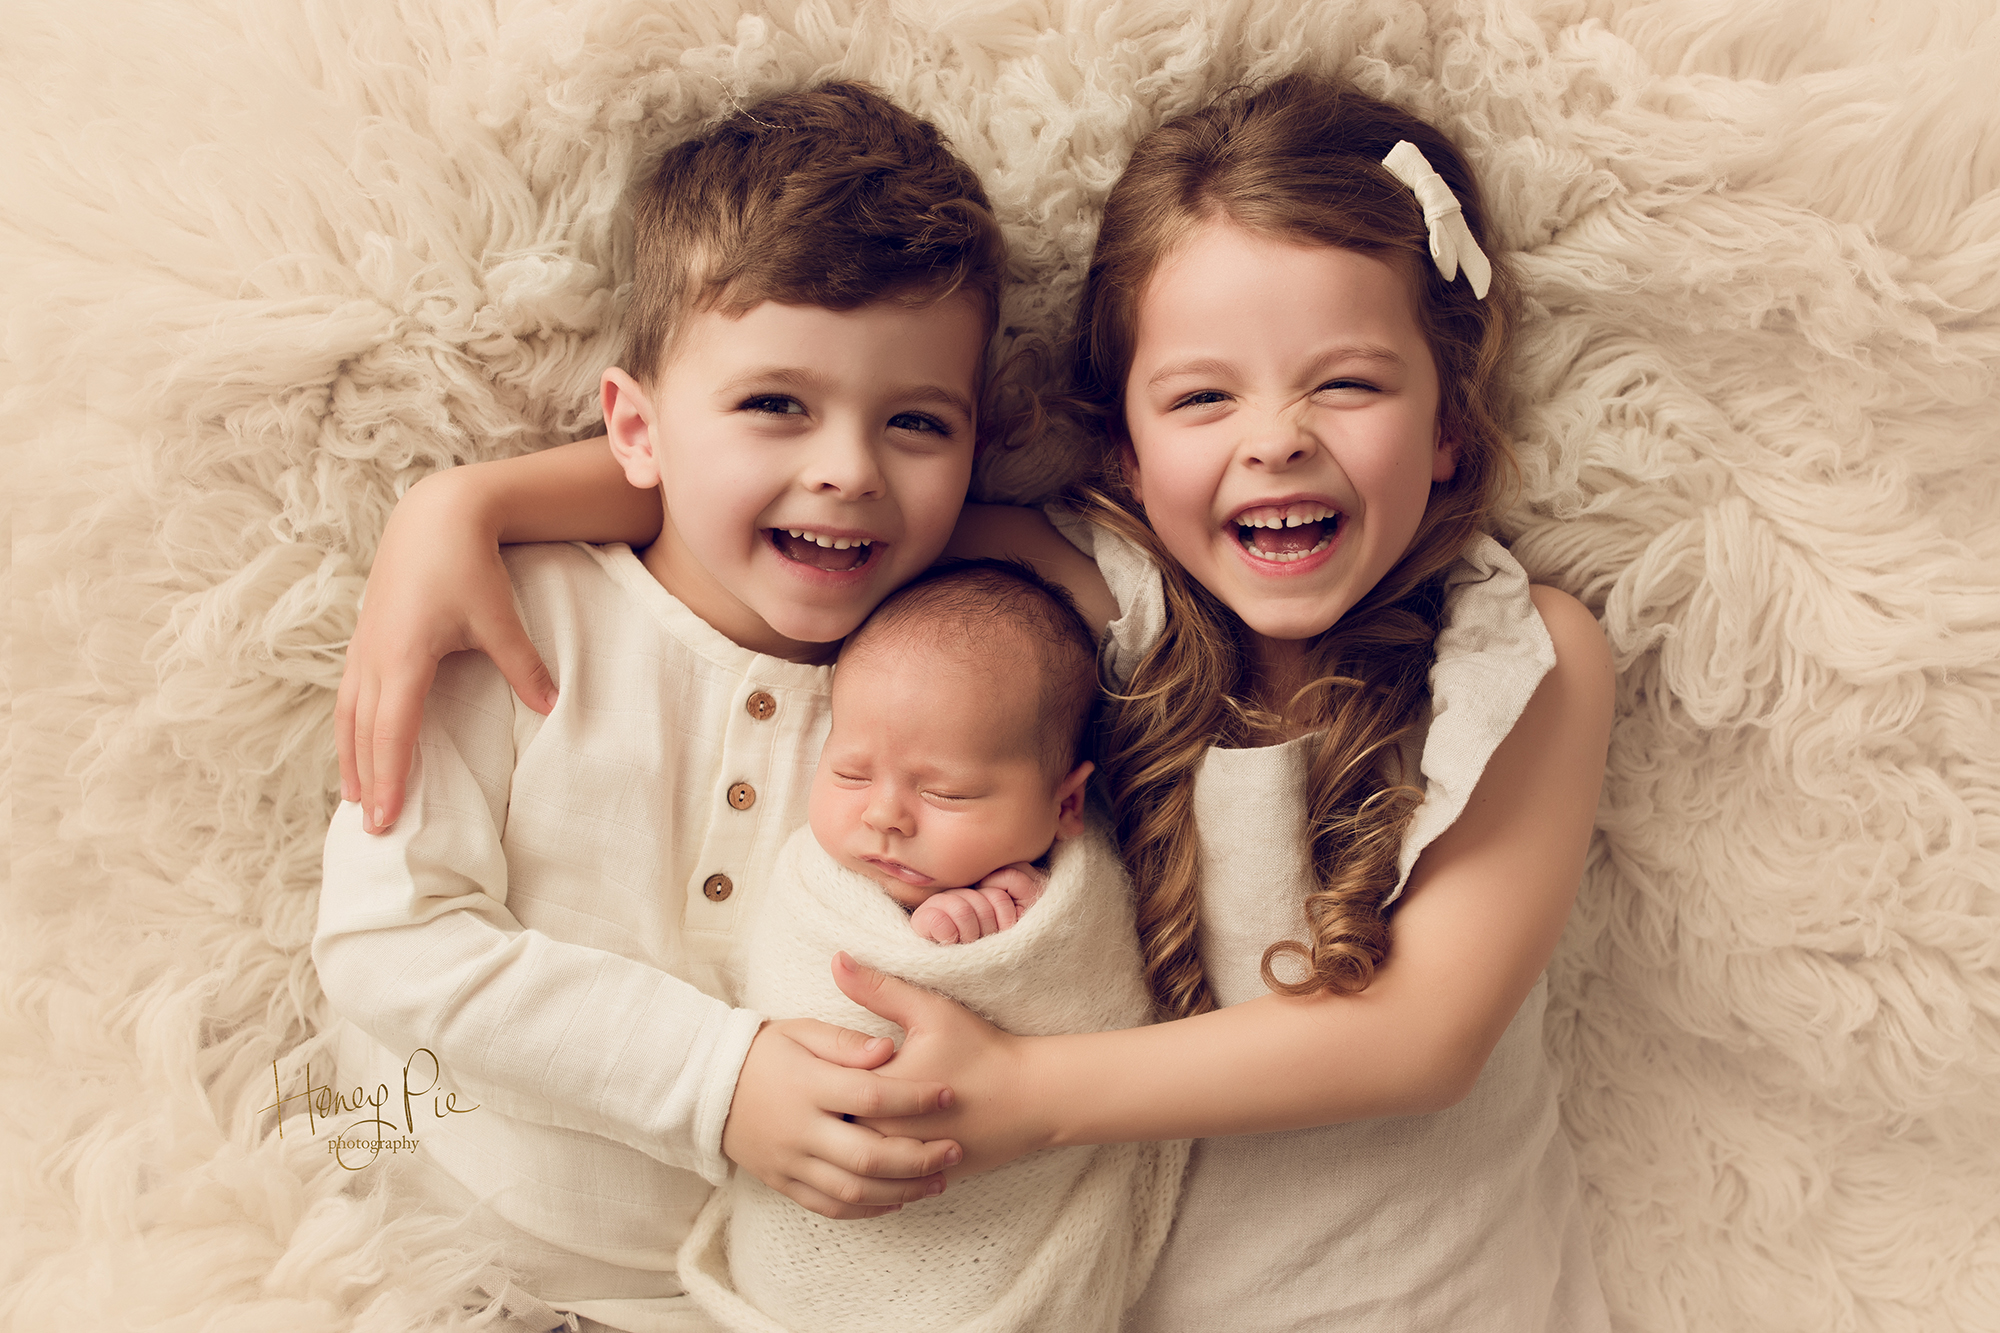 Big brother & sister siblings loving their newborn baby brother at a photoshoot in worthing